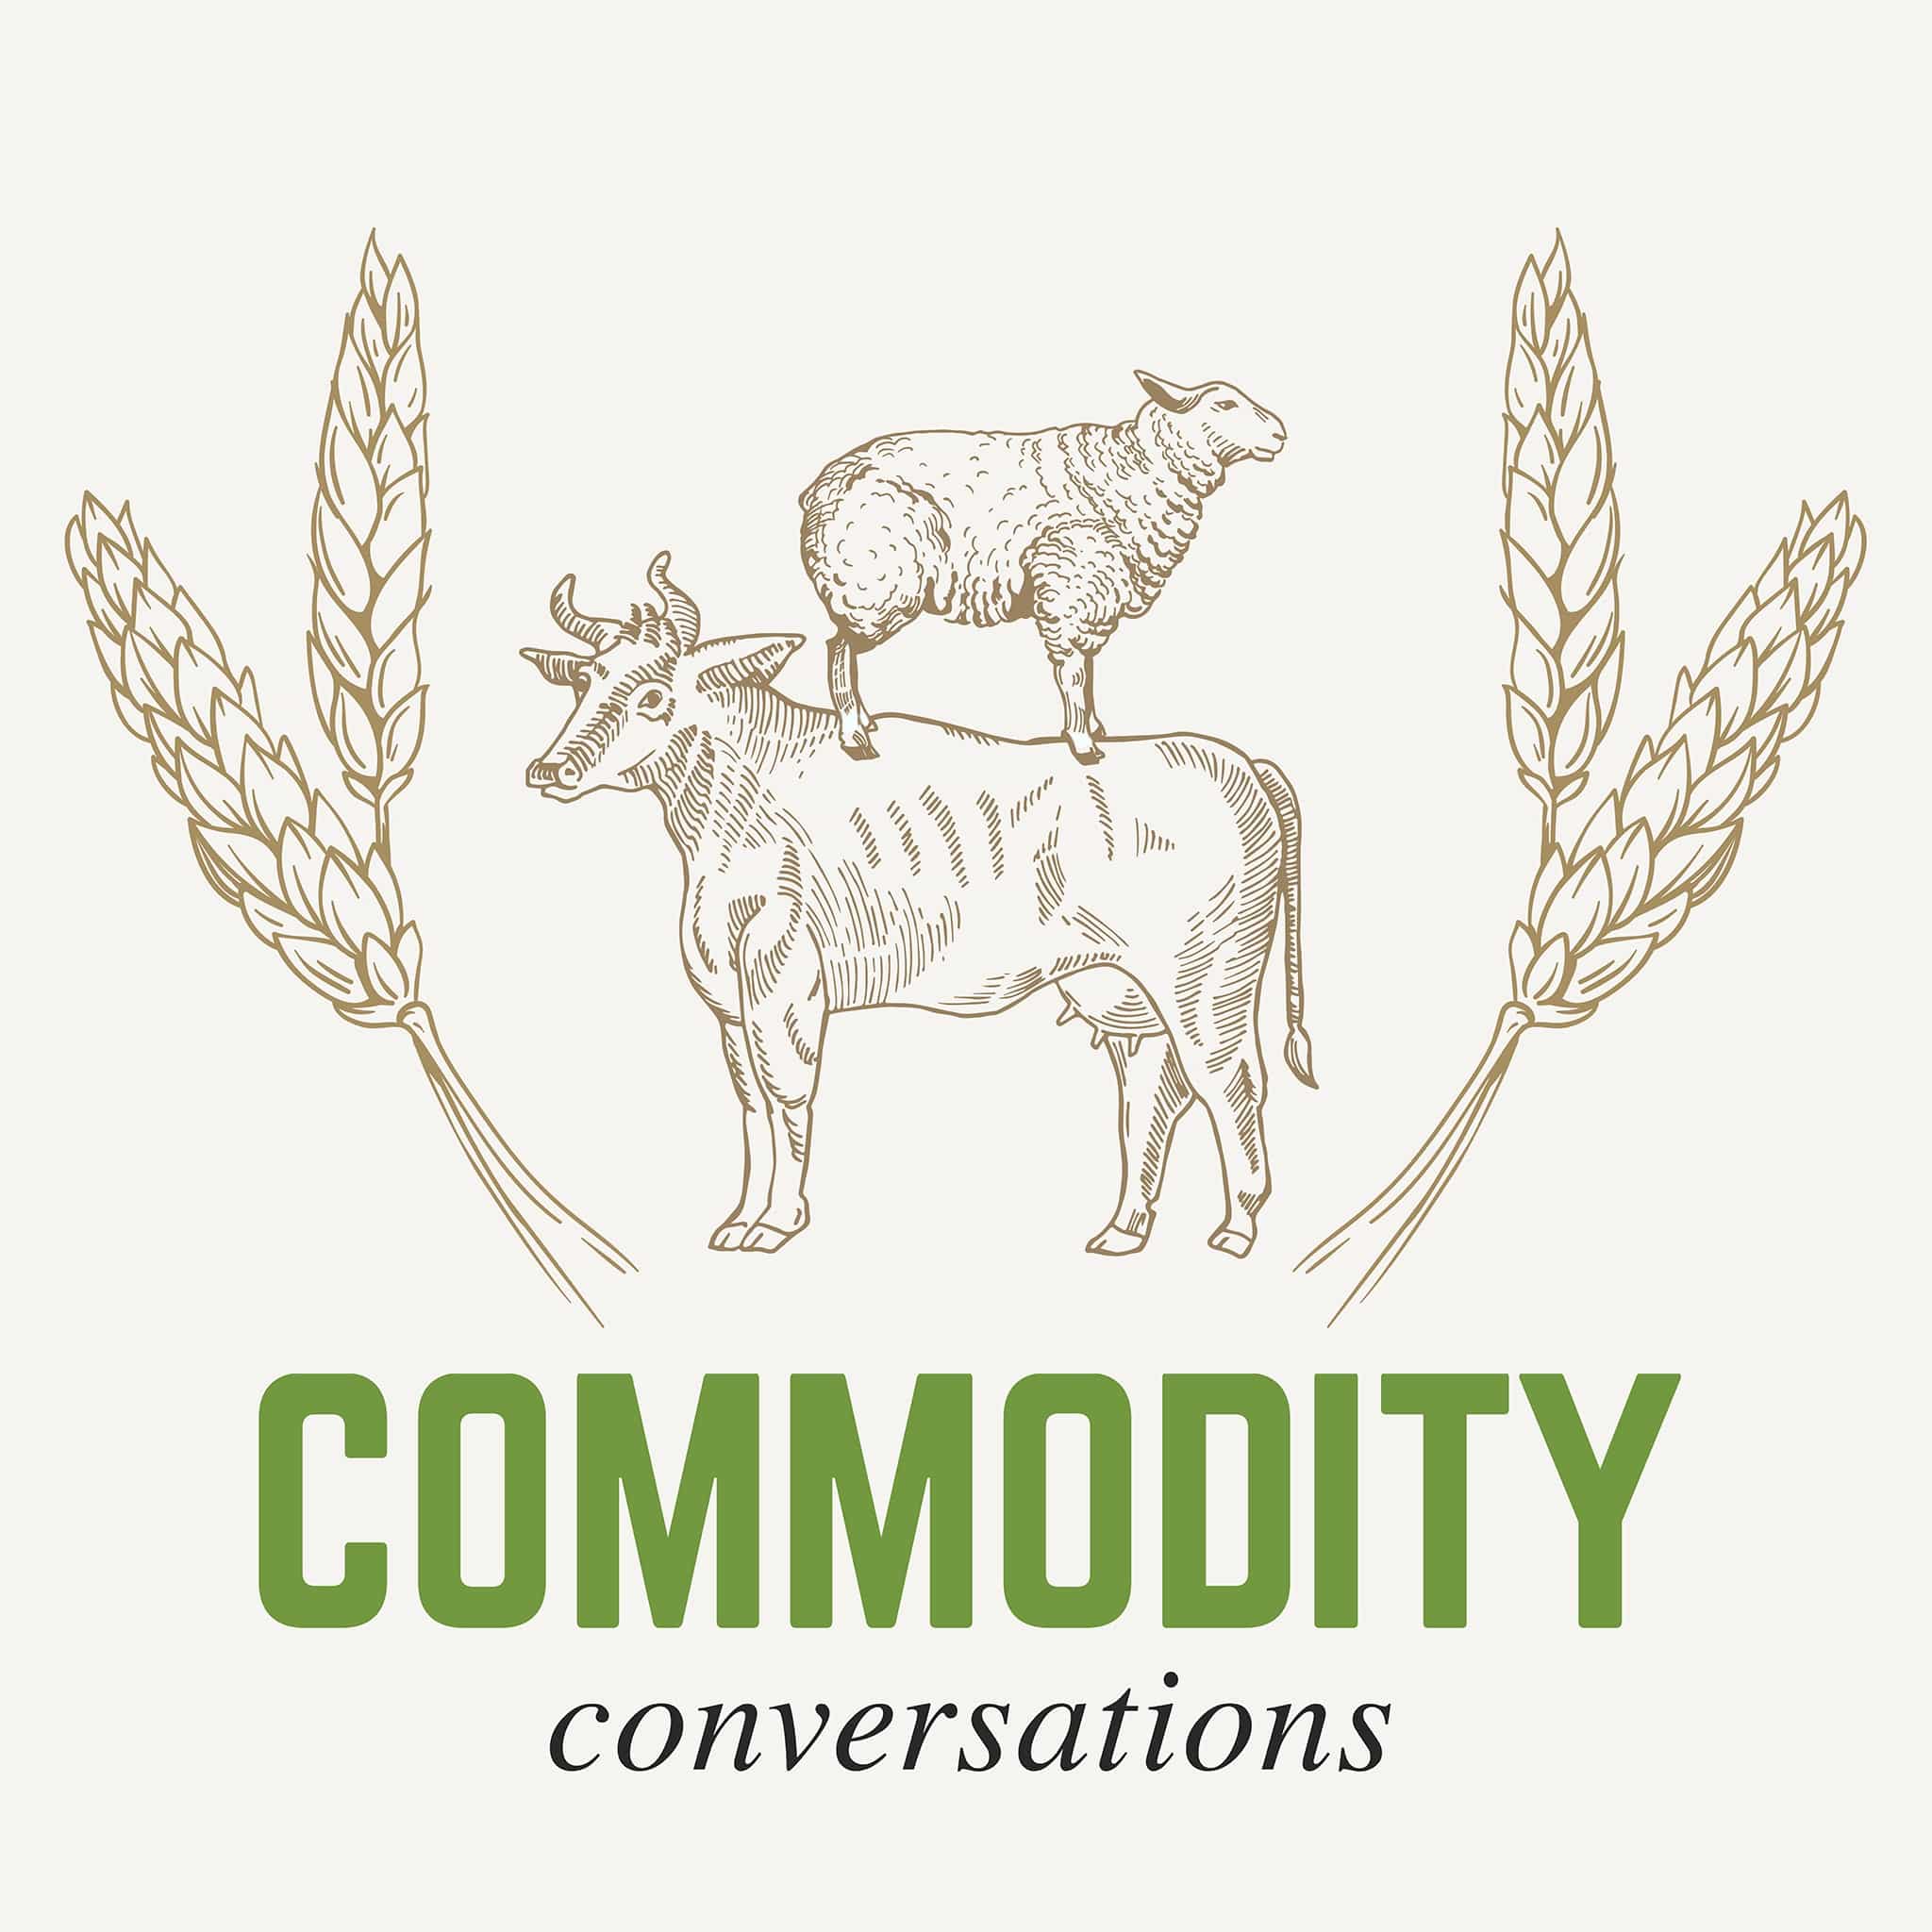 Commodity Conversations: Who will chop the spring lamb?